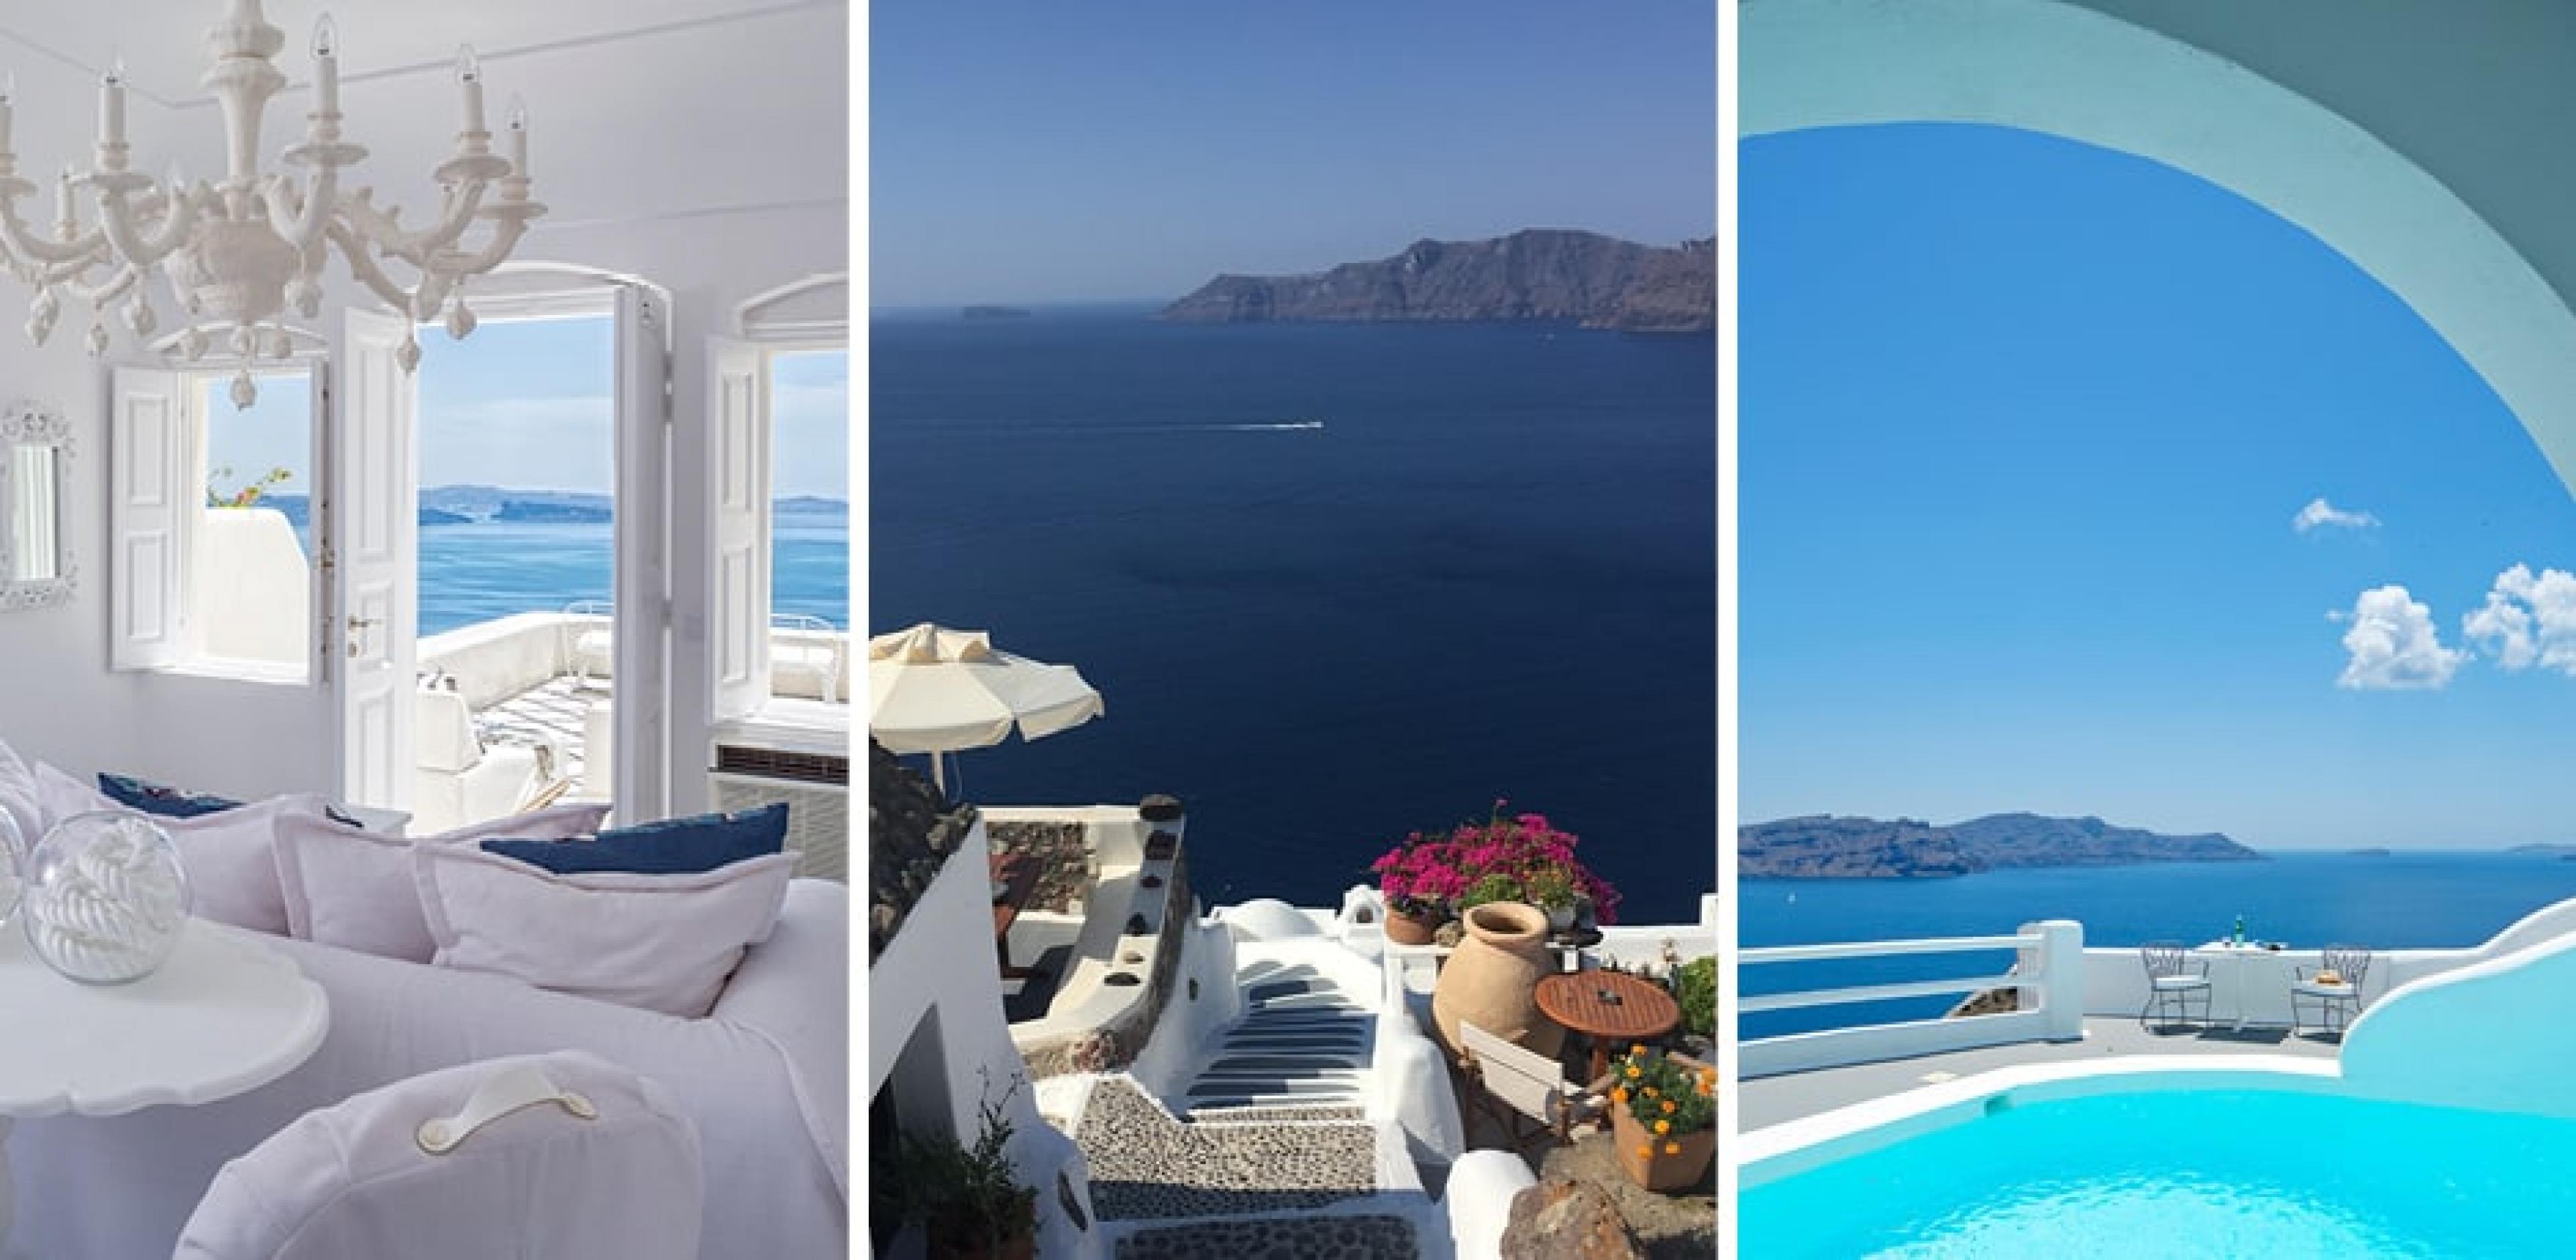 Canaves Suites, a Oia scenic, and Kirini in Santorini Greece